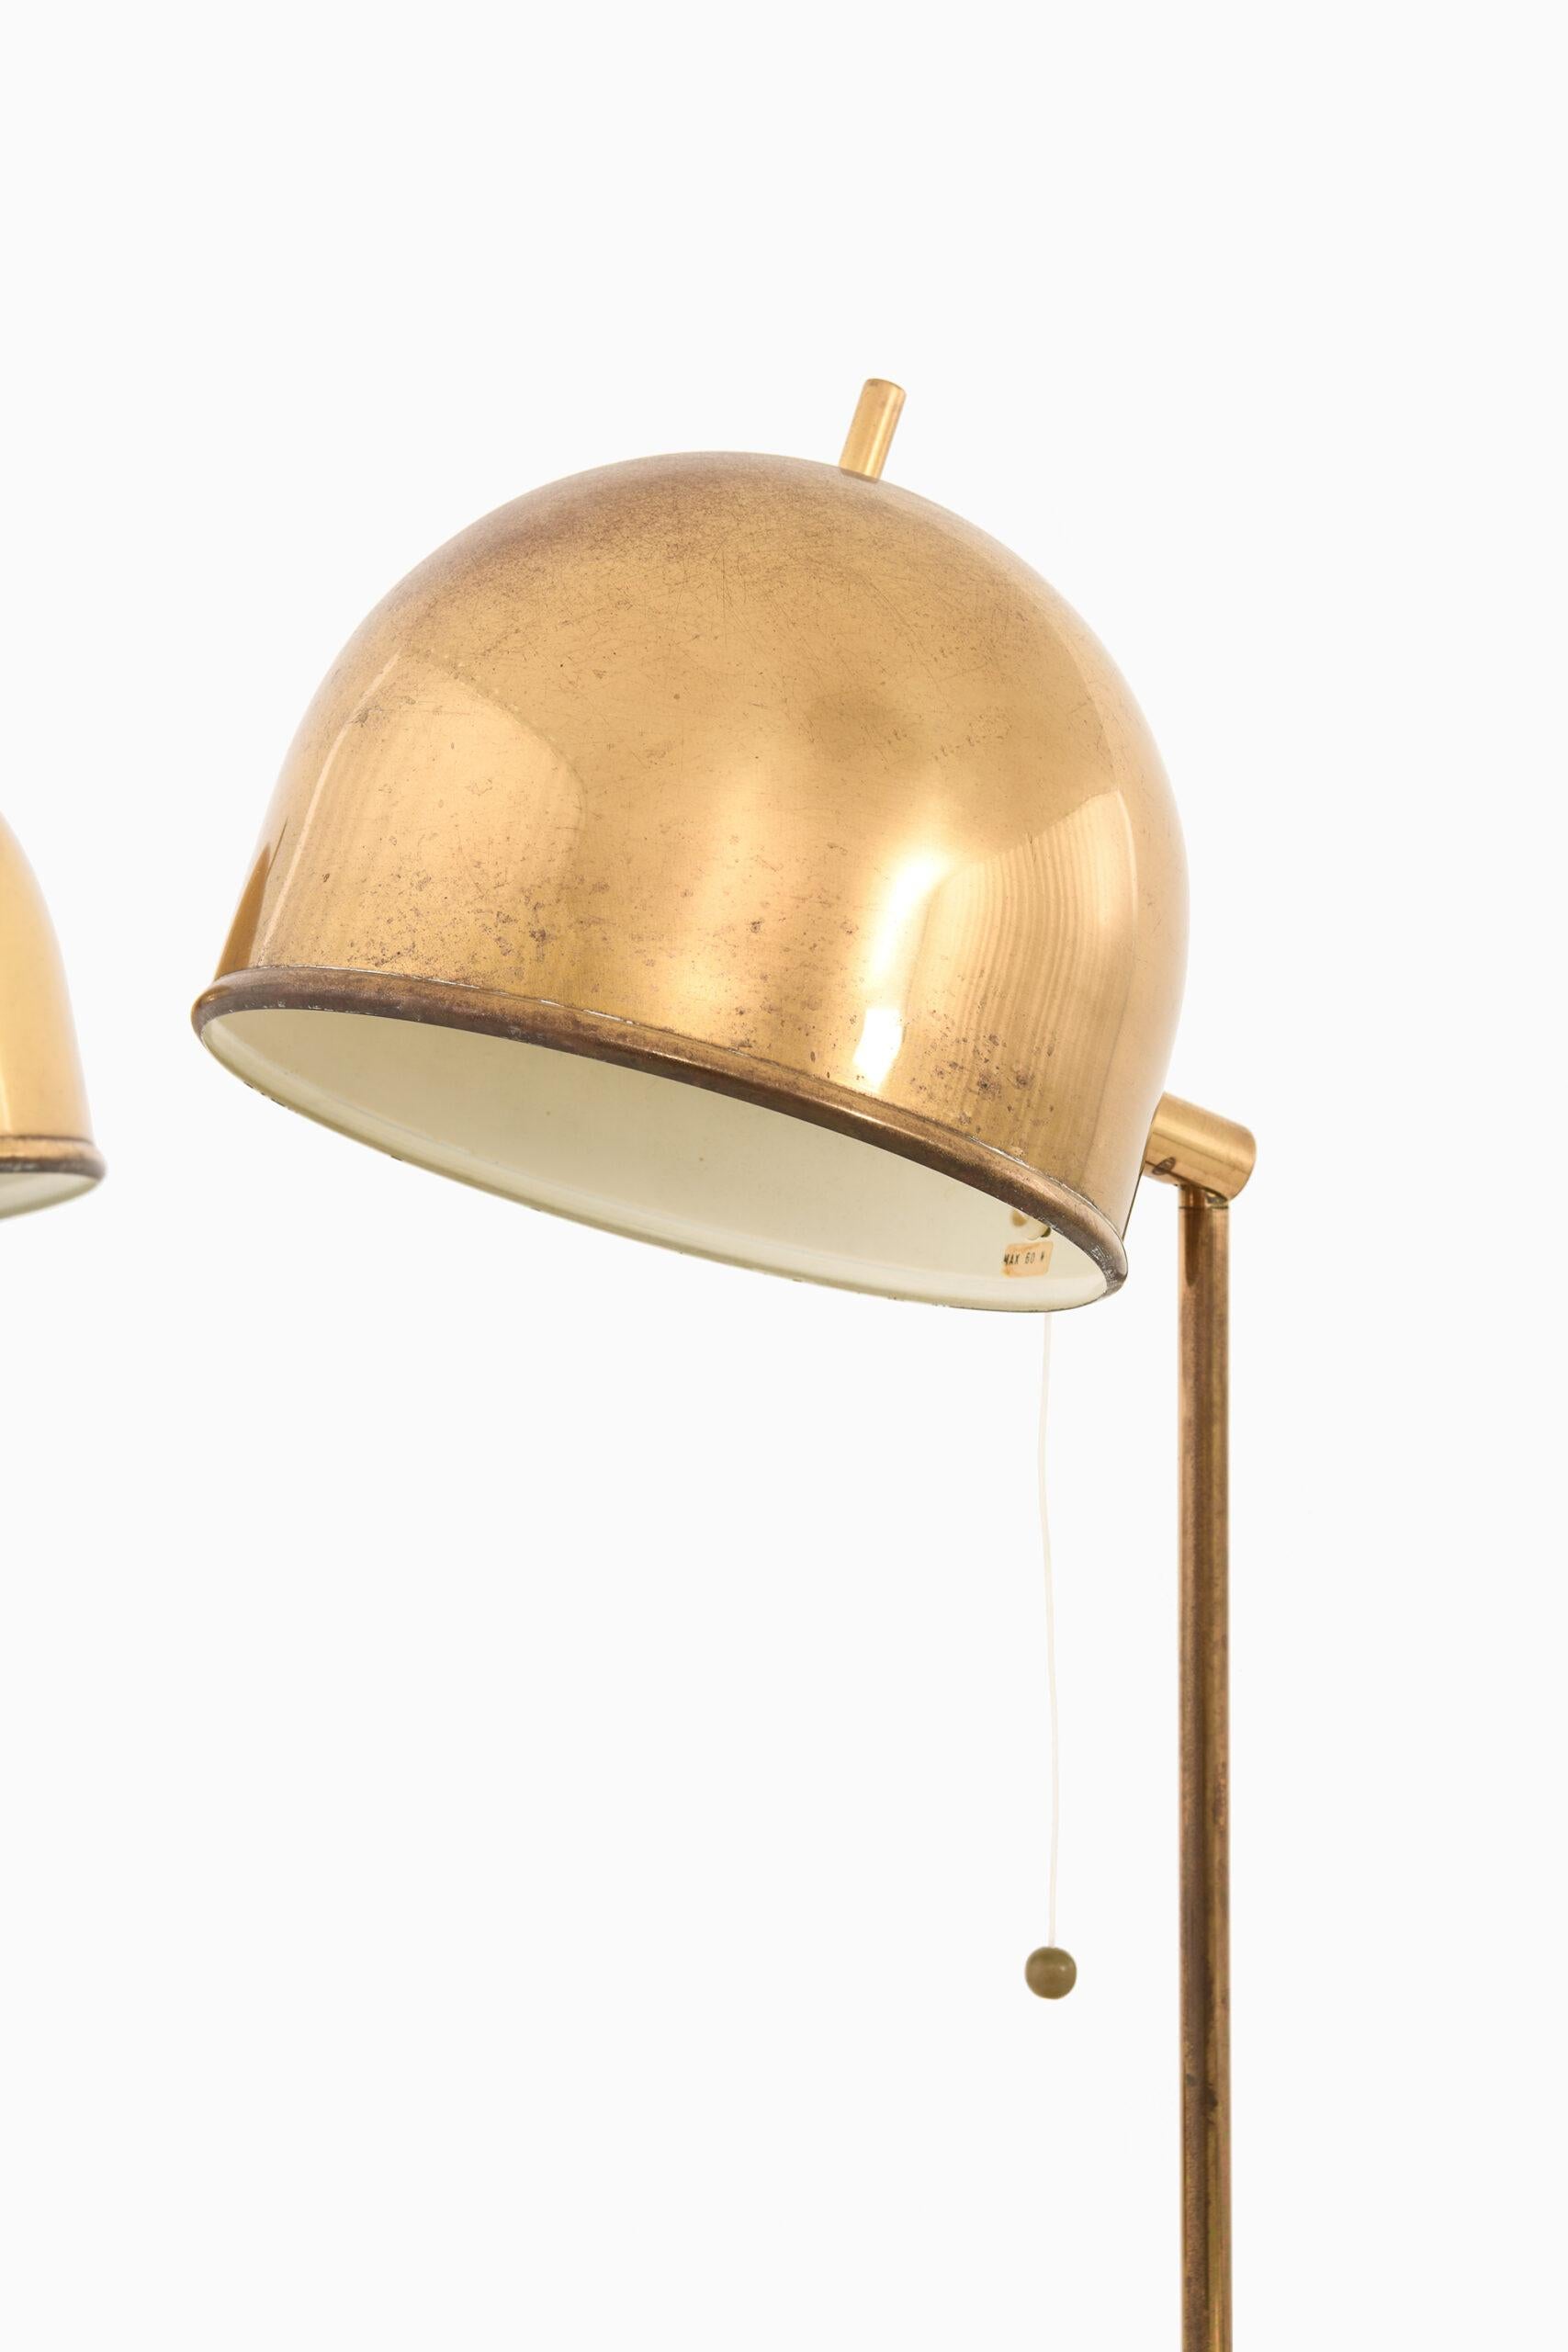 Pair of table lamps model B-075 by unknown designer. Produced by Bergbom in Sweden.